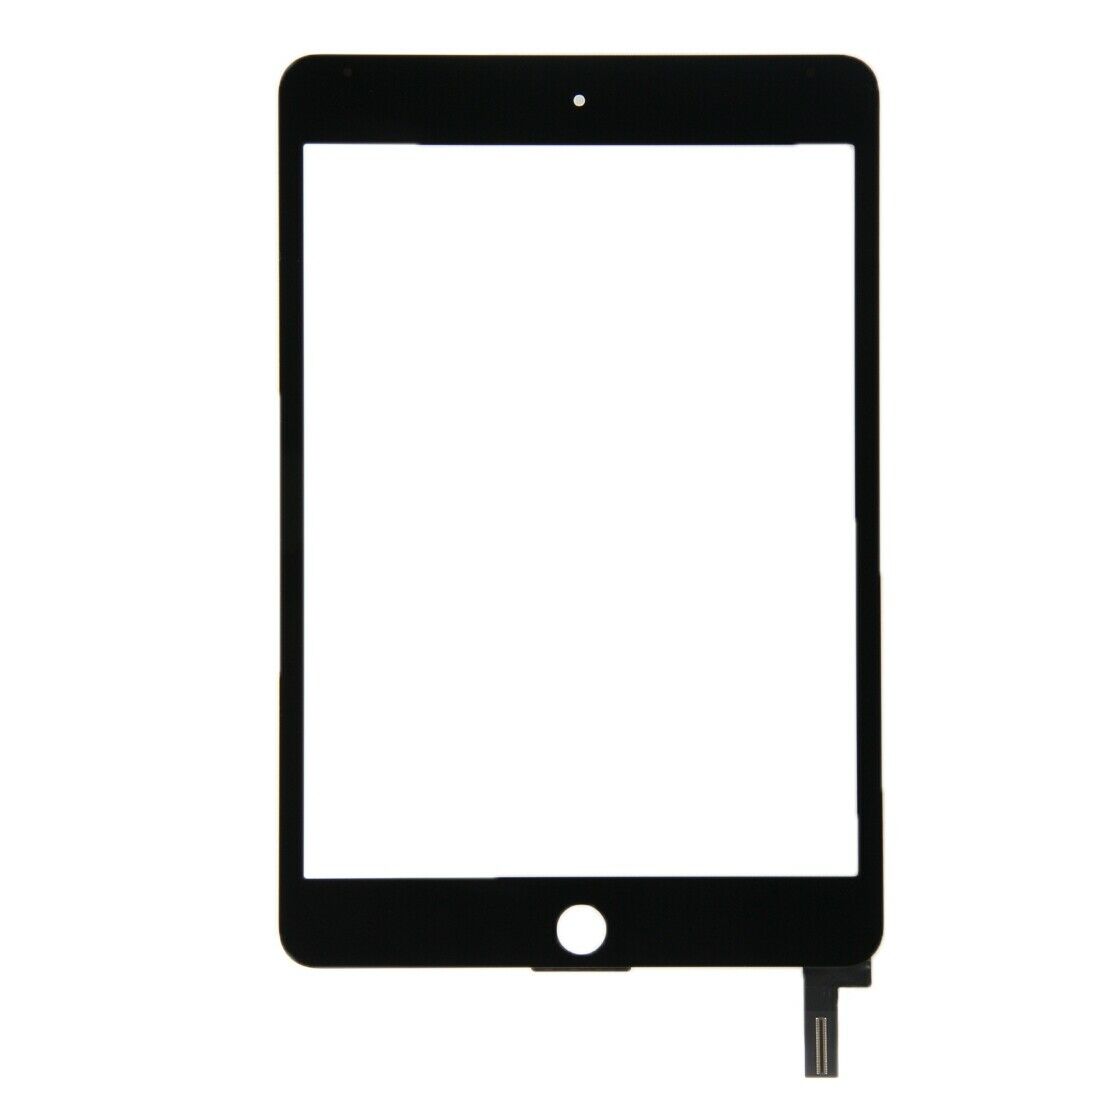 Apple iPad Mini 4 Replacement Touch Screen Digitizer - Black for [product_price] - First Help Tech